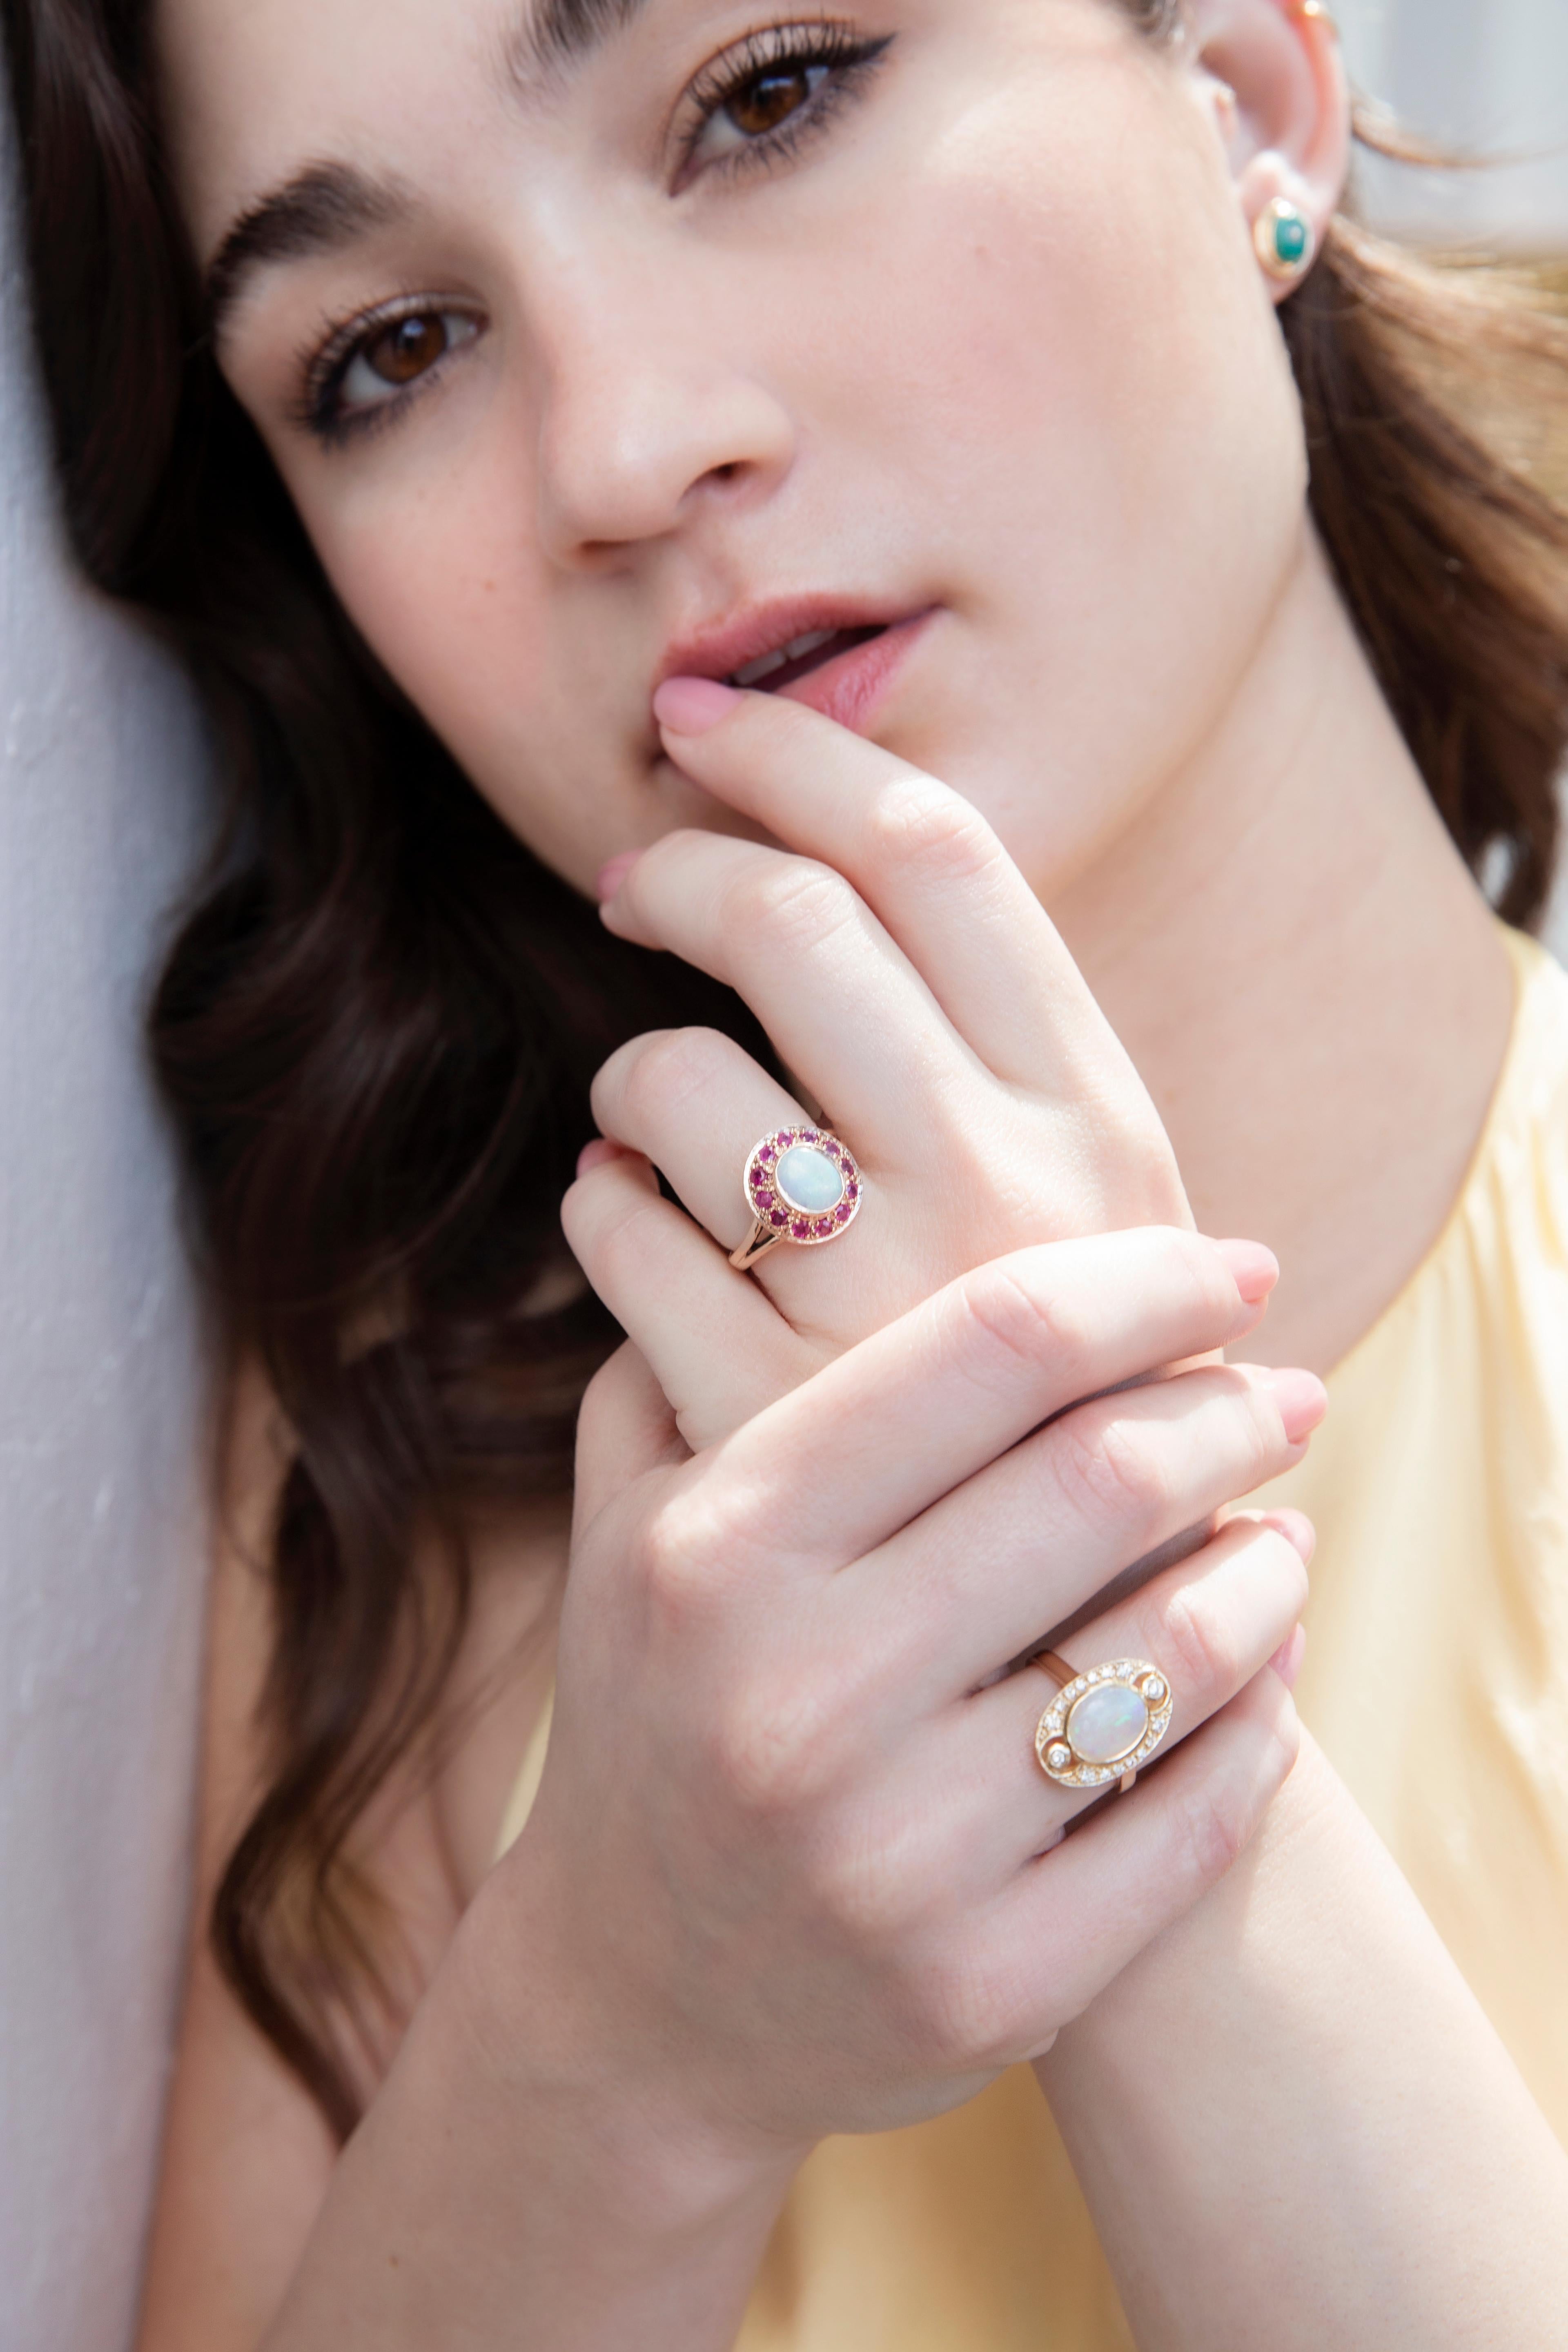 Diamonds are seductive and opals offer mystery. The 9 carat gold Frances Ring is a story evocative of long past journeys on The Orient Express, an enigma, both basking in the light and welcoming of life's shadows. Glamorous, decadent and to be